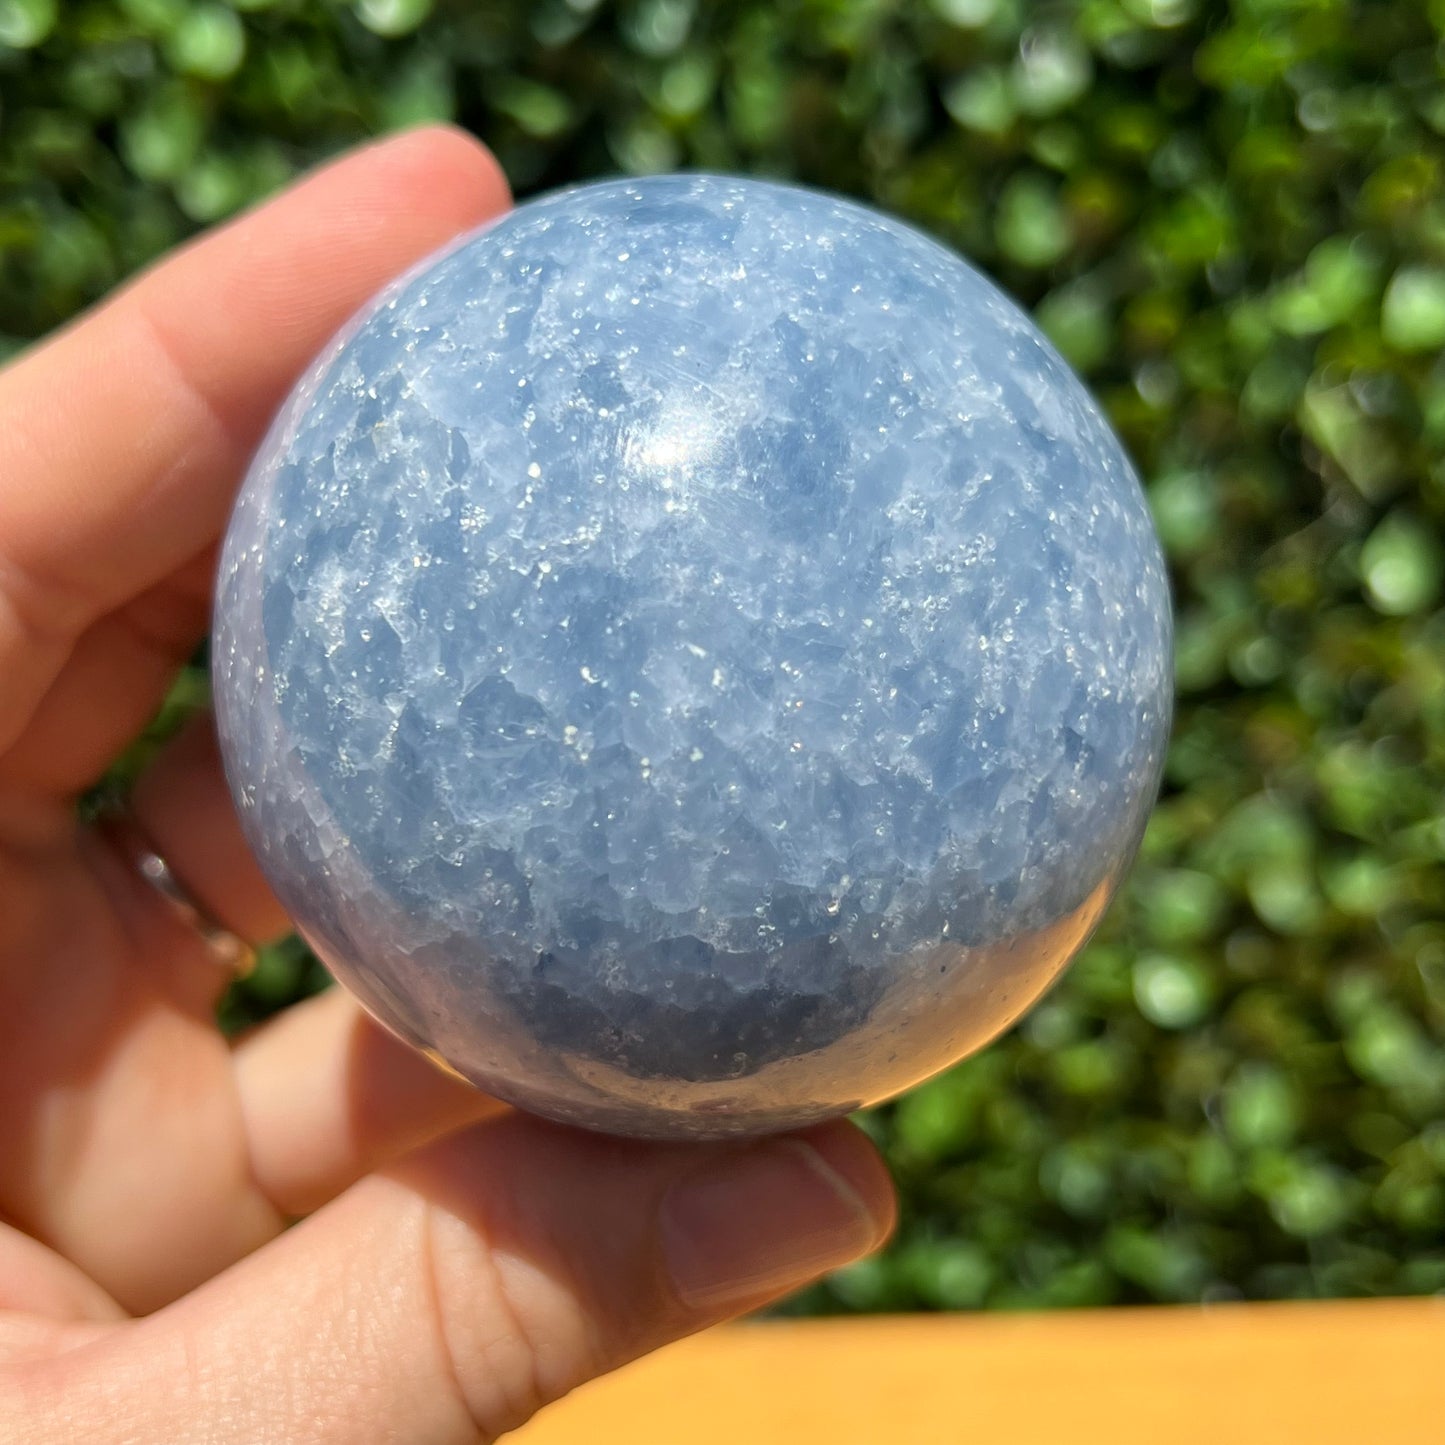 Blue Calcite Crystal Sphere